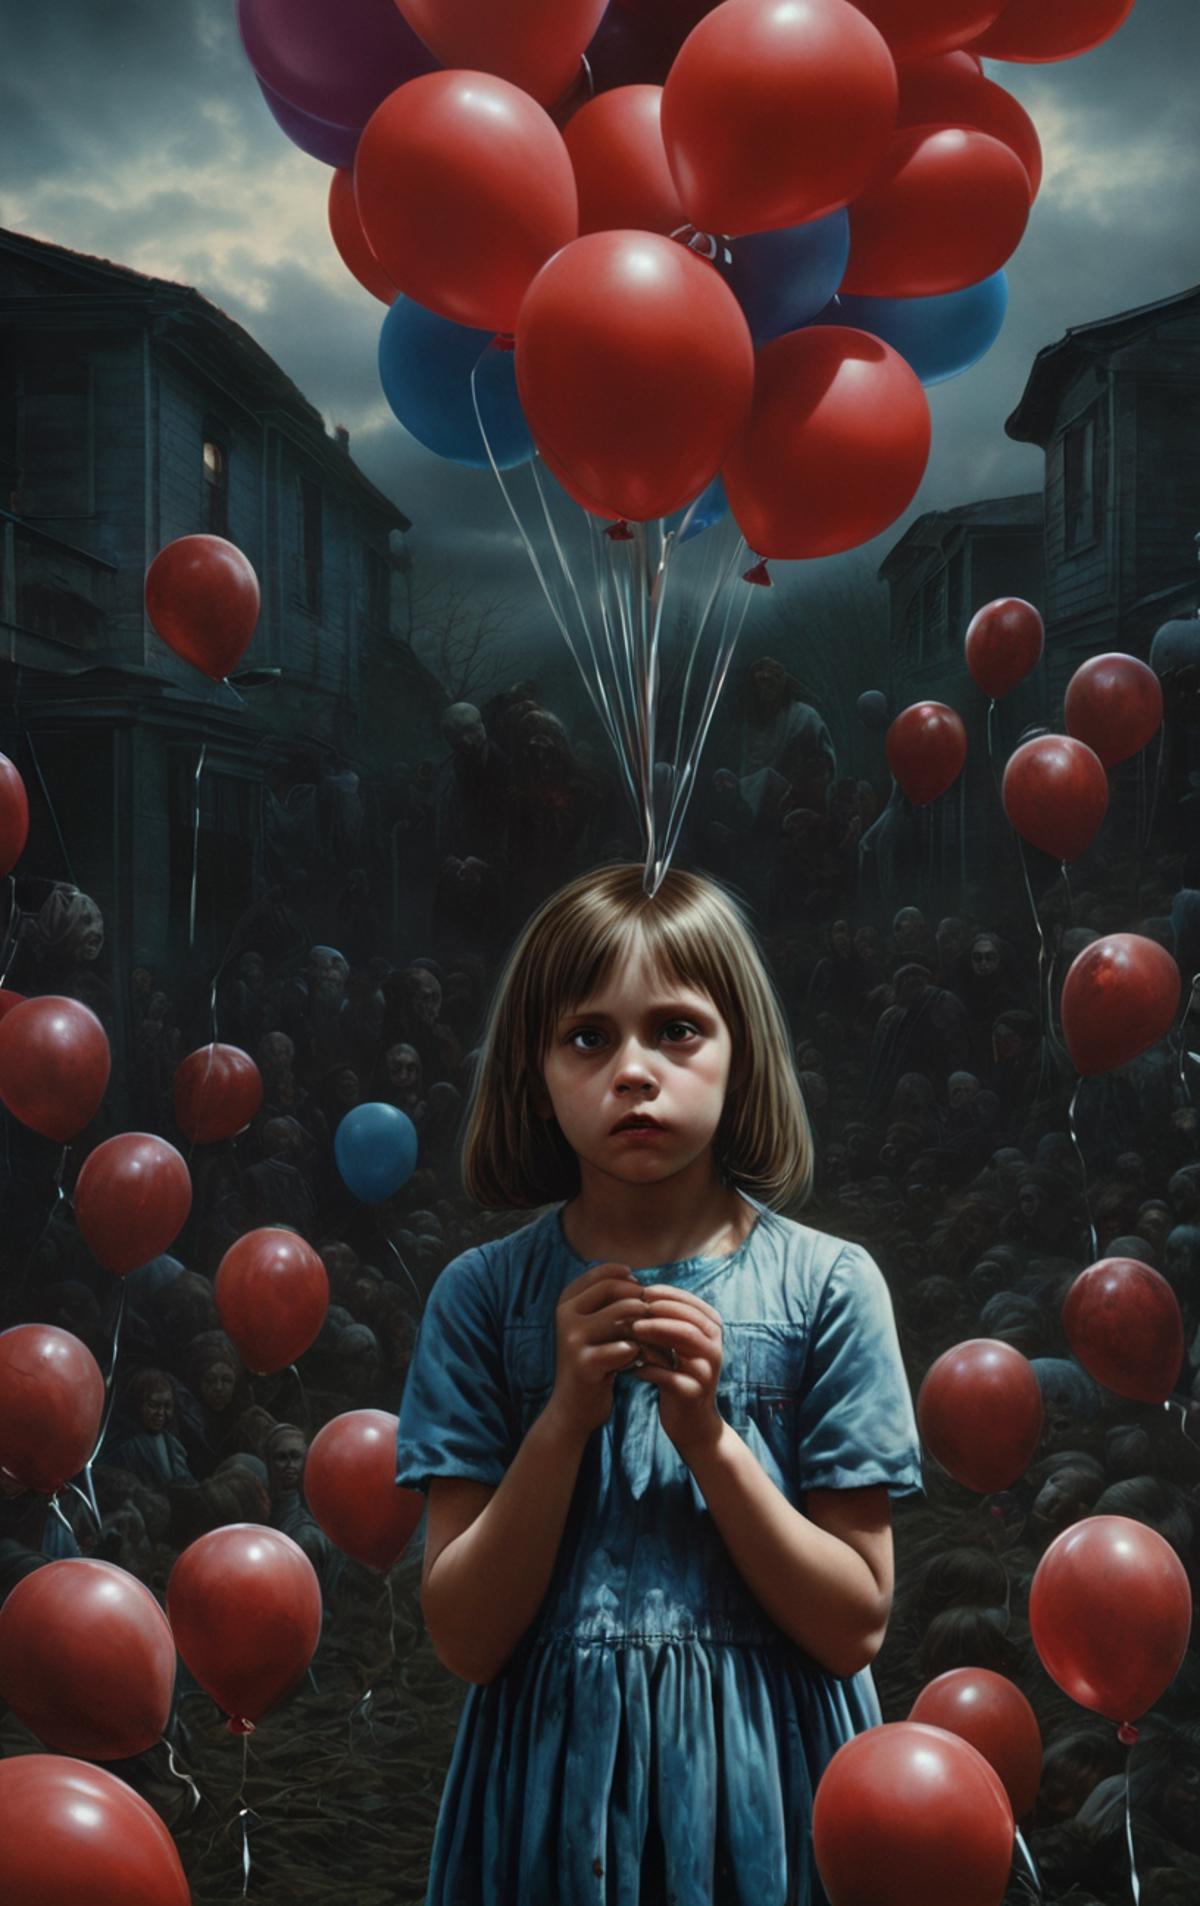 A little girl in a blue dress surrounded by red and blue balloons.